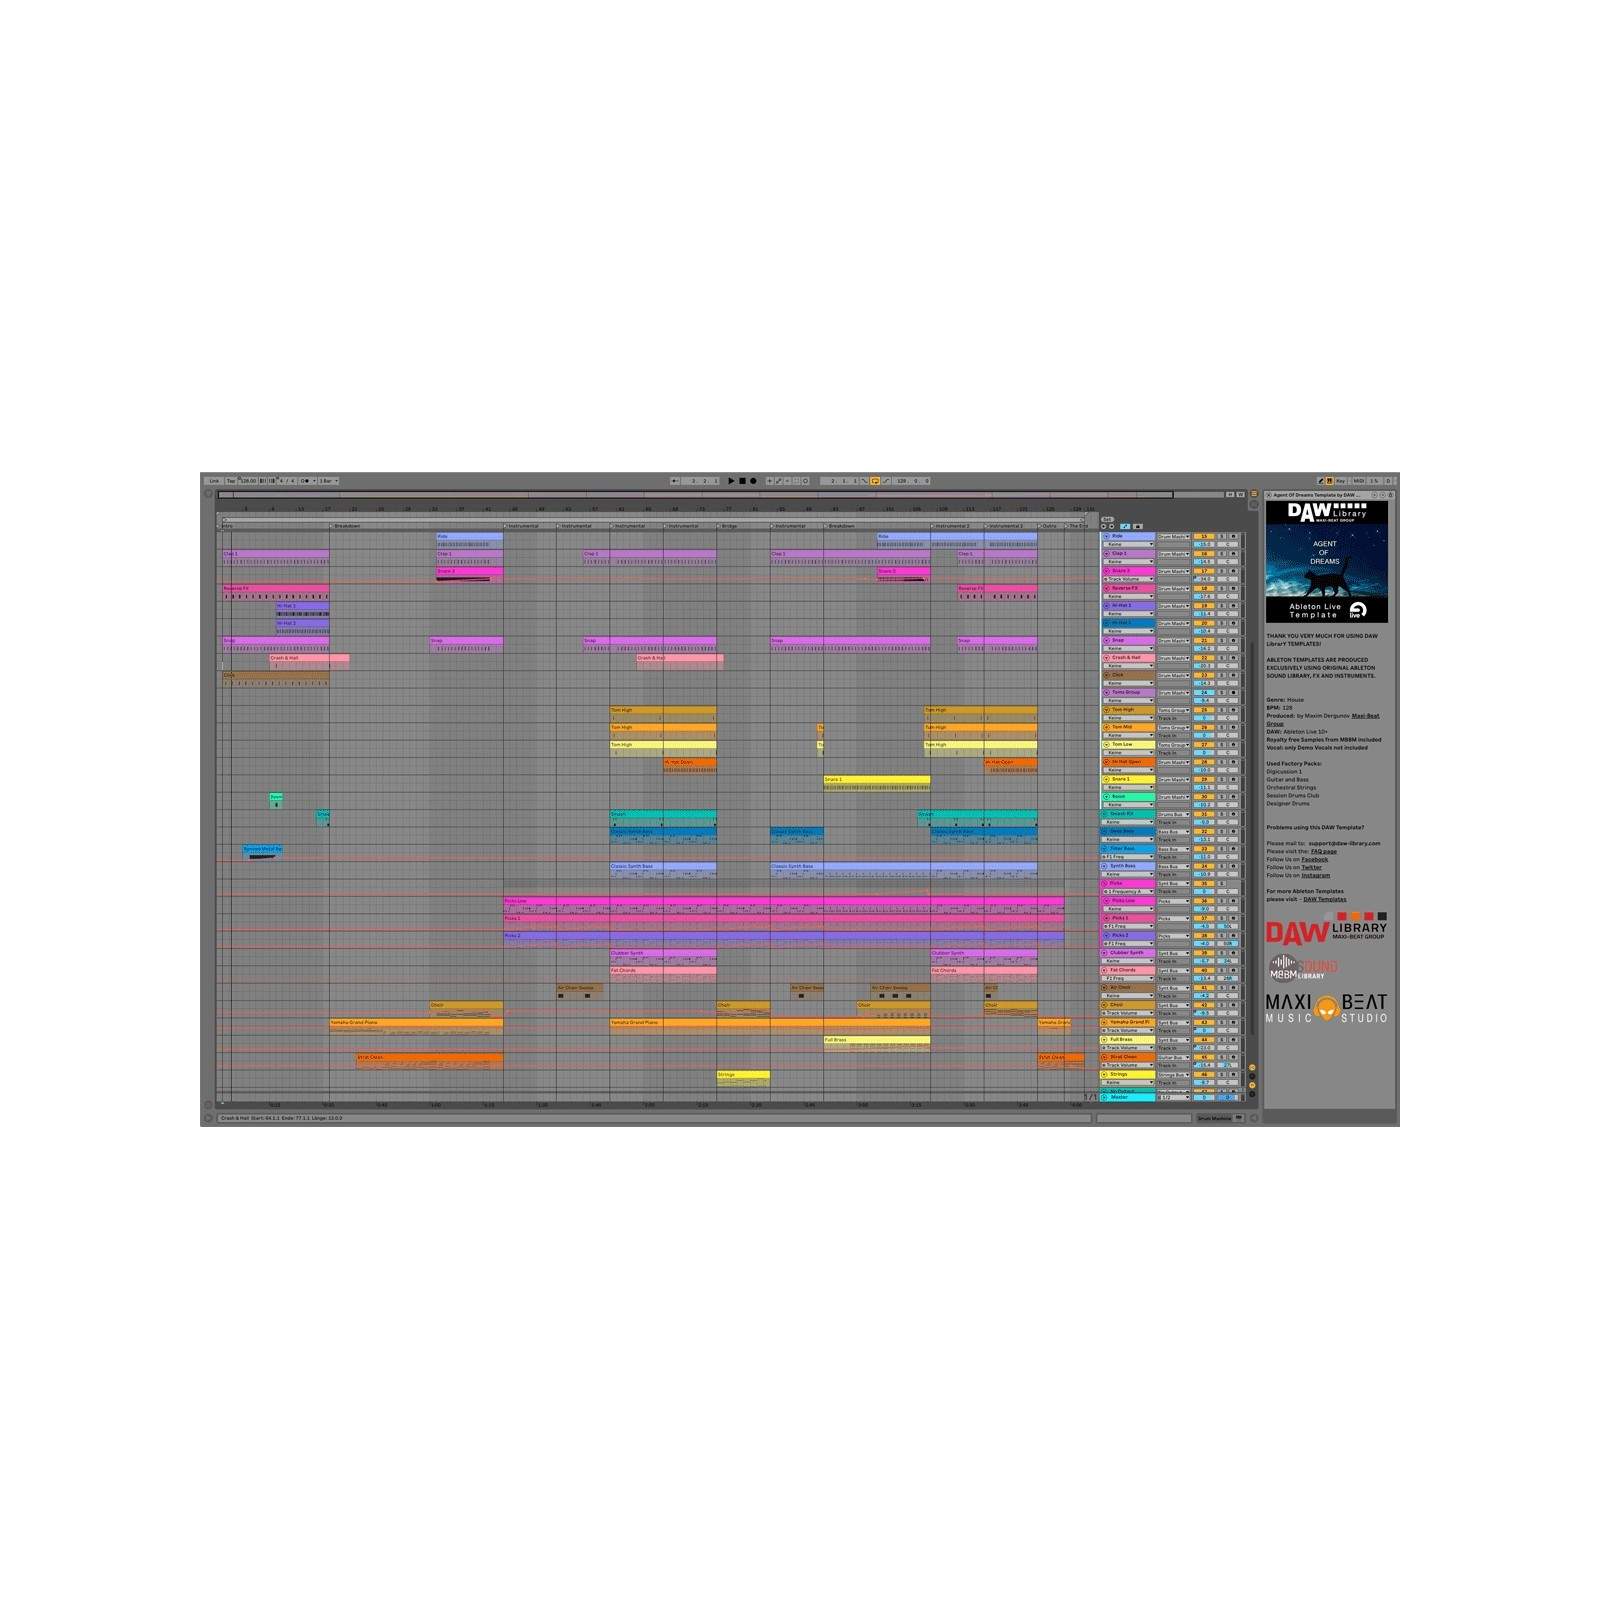 Agent Of Dreams - Ableton Template Maxi-Beat Music Studio - 2